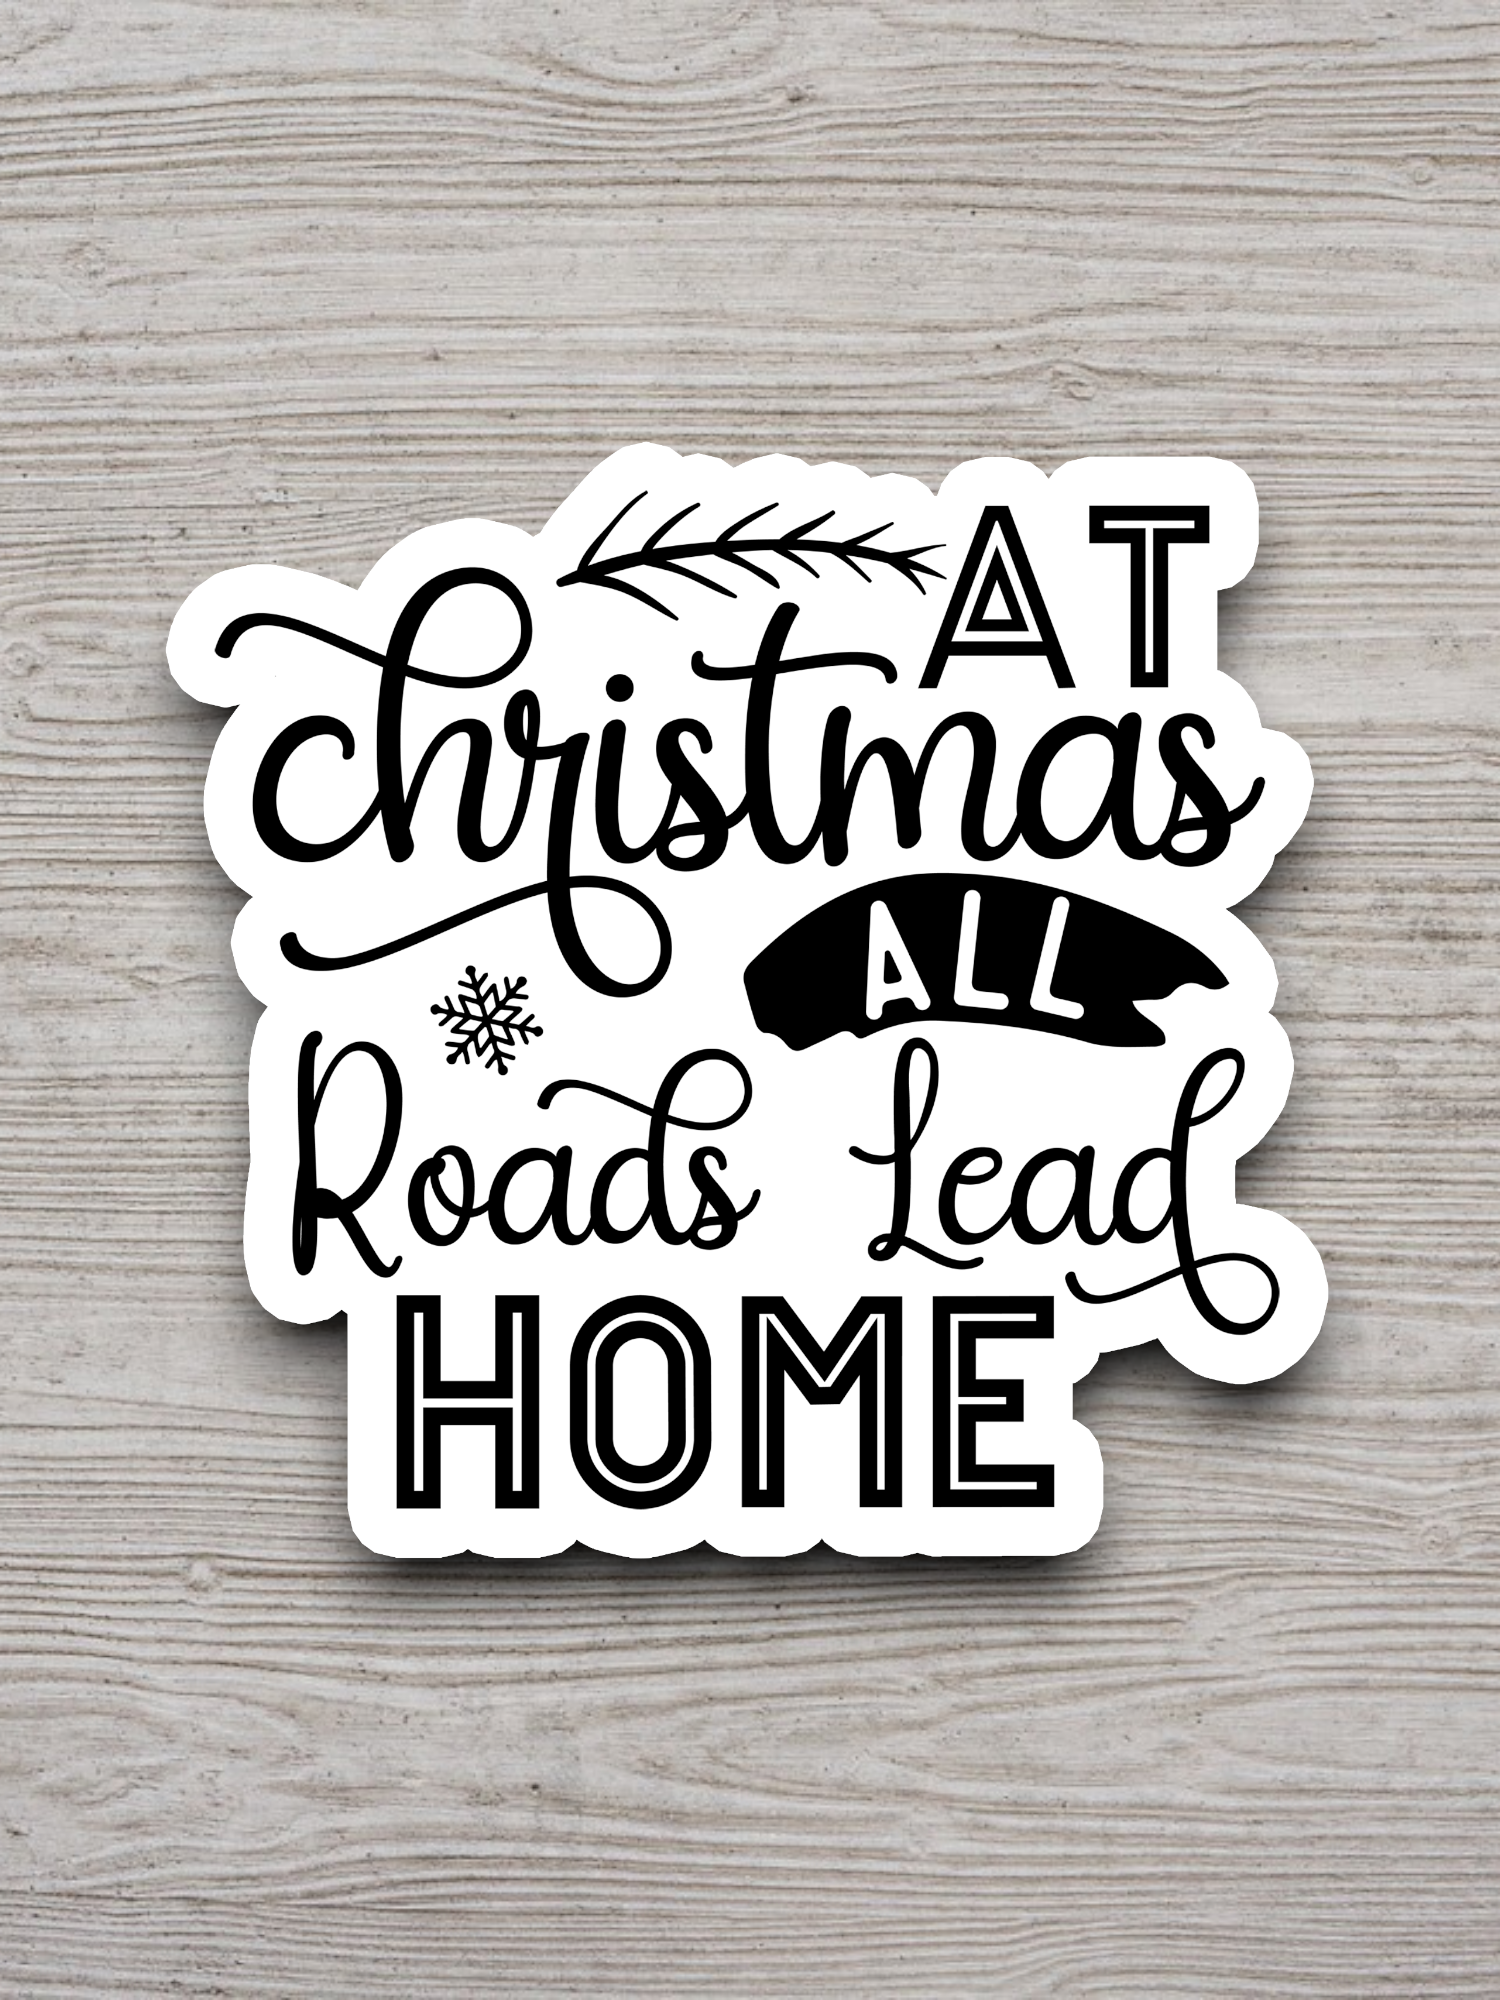 At Christmas All Roads Lead Home  1 - Holiday Sticker